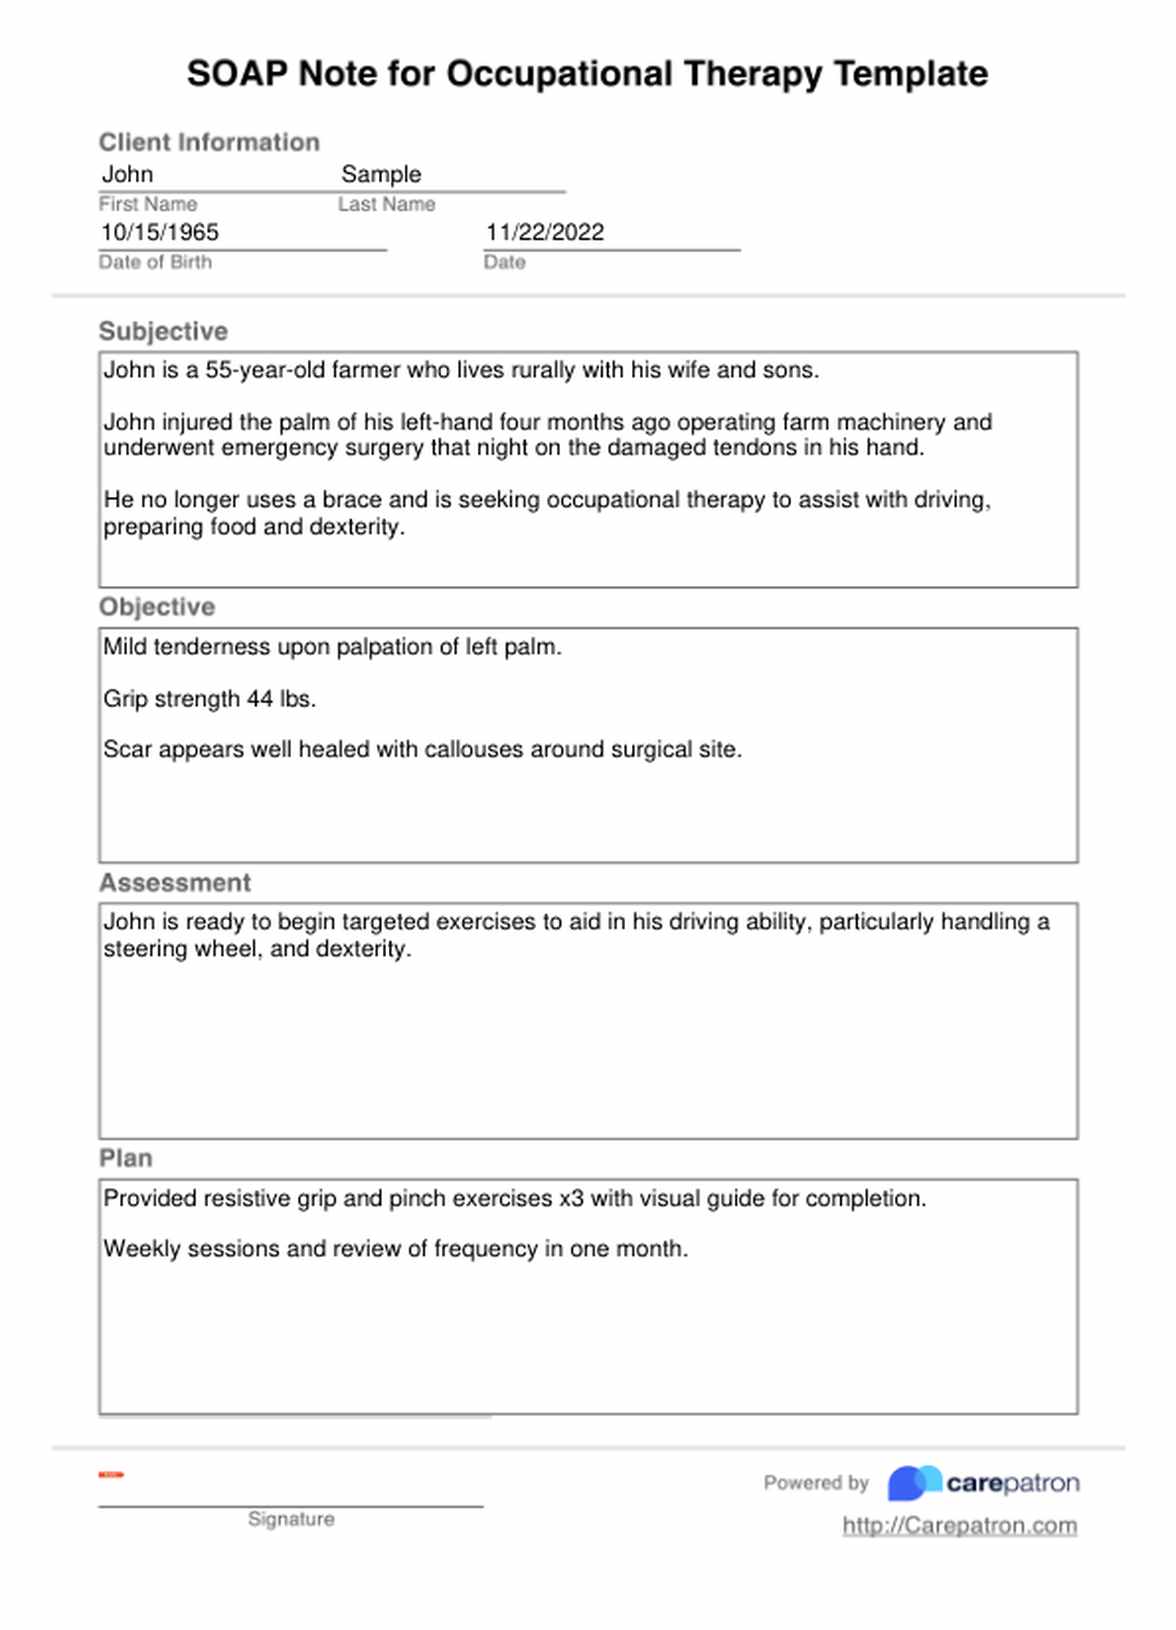 SOAP Notes For Occupational Therapy Template PDF Example